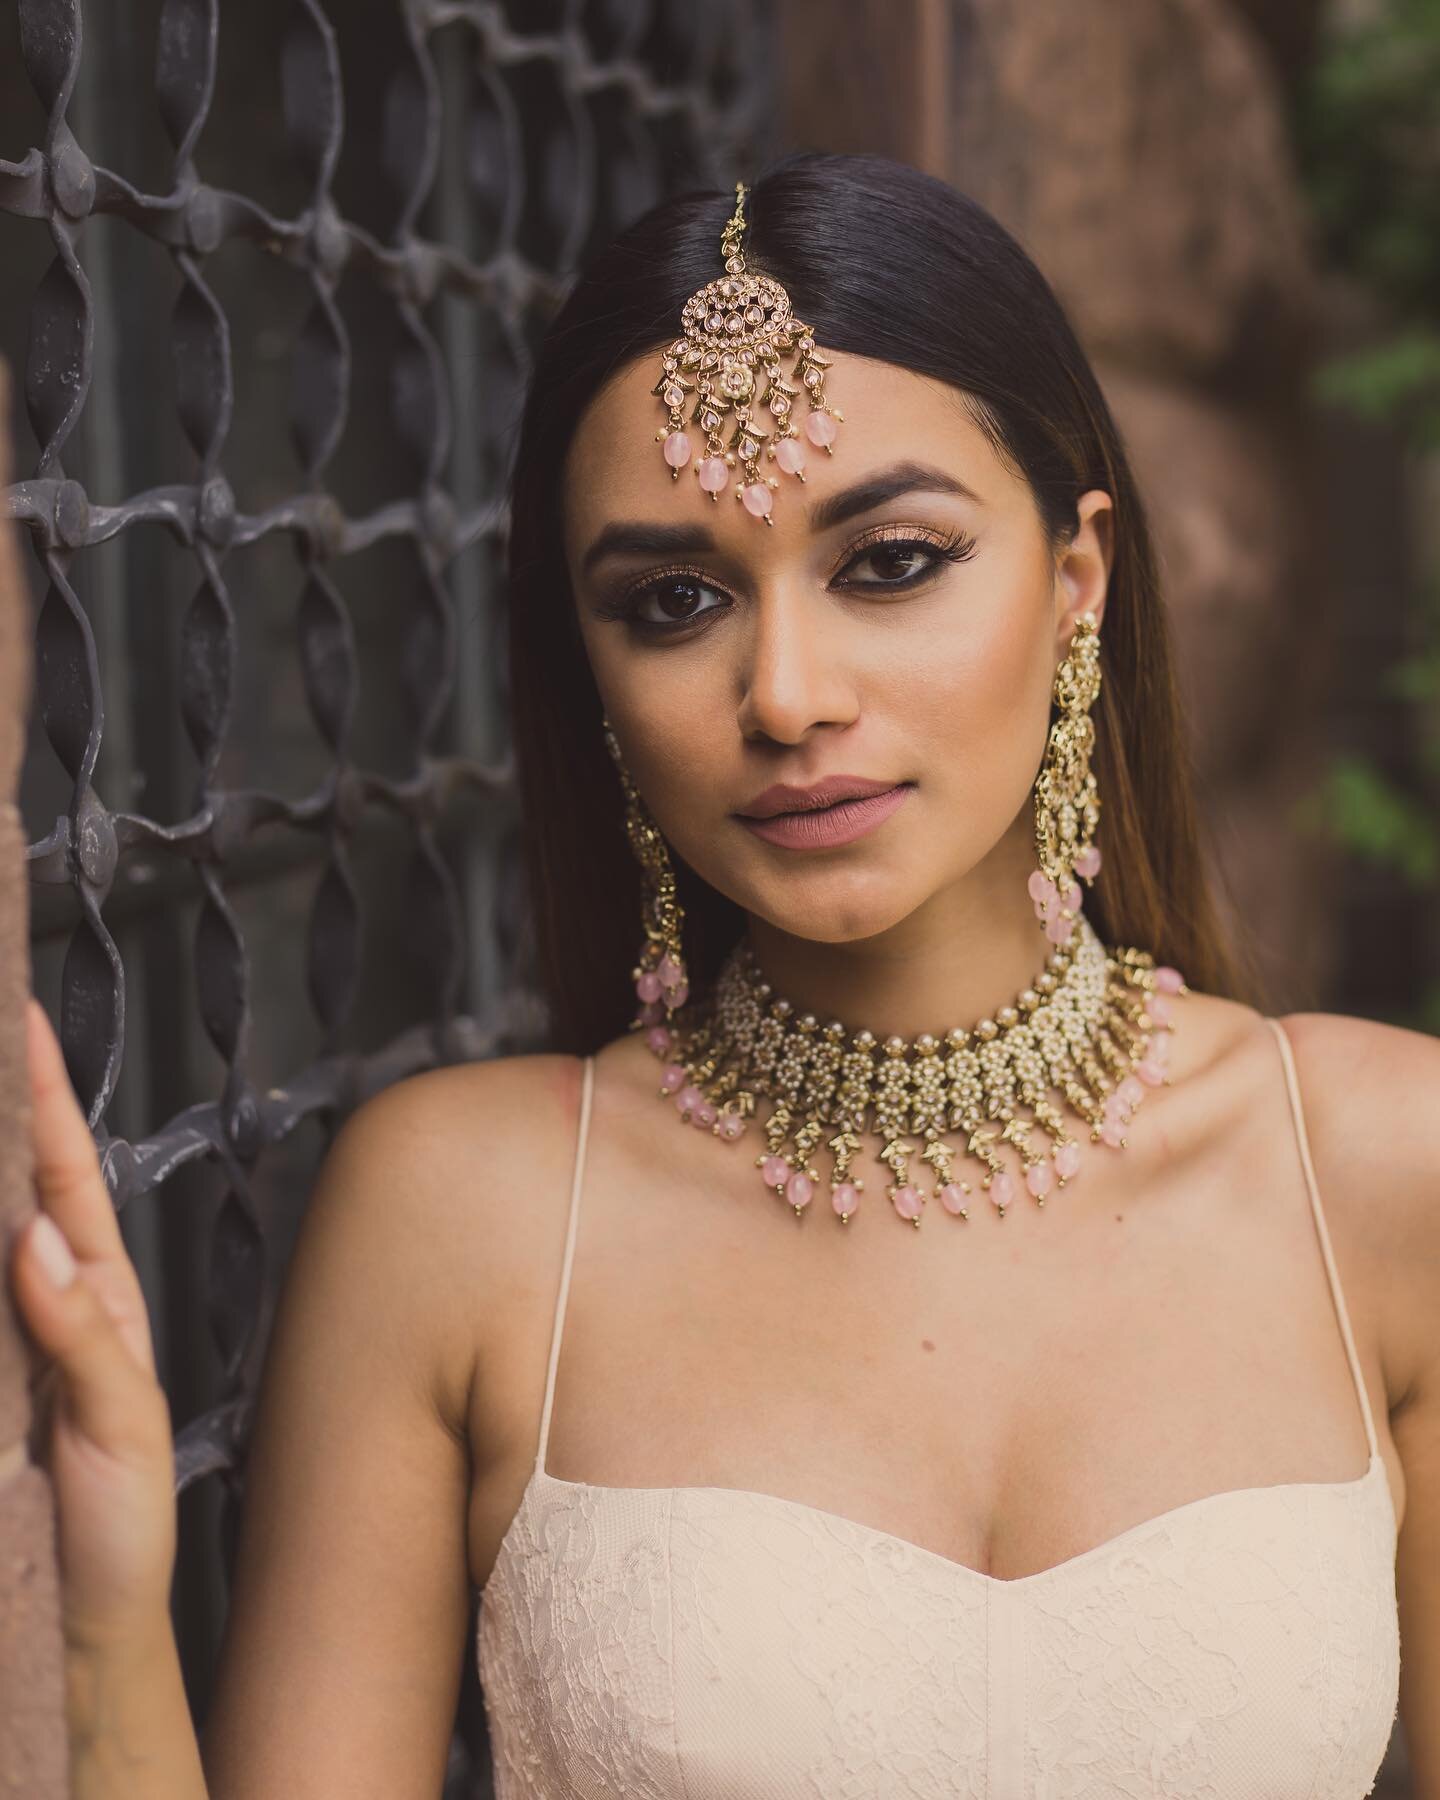 Effortless beauty is my favorite. Whether it&rsquo;s a bride or model, this glow is timeless!

Team:
Jewelry: ReeMat Designs (@reematdesigns_)
Boutique: Terra Inde (@terra_inde)
Photography and Retouching: Pooja Rudra (@dharpooja)
Makeup Artist: Jasm